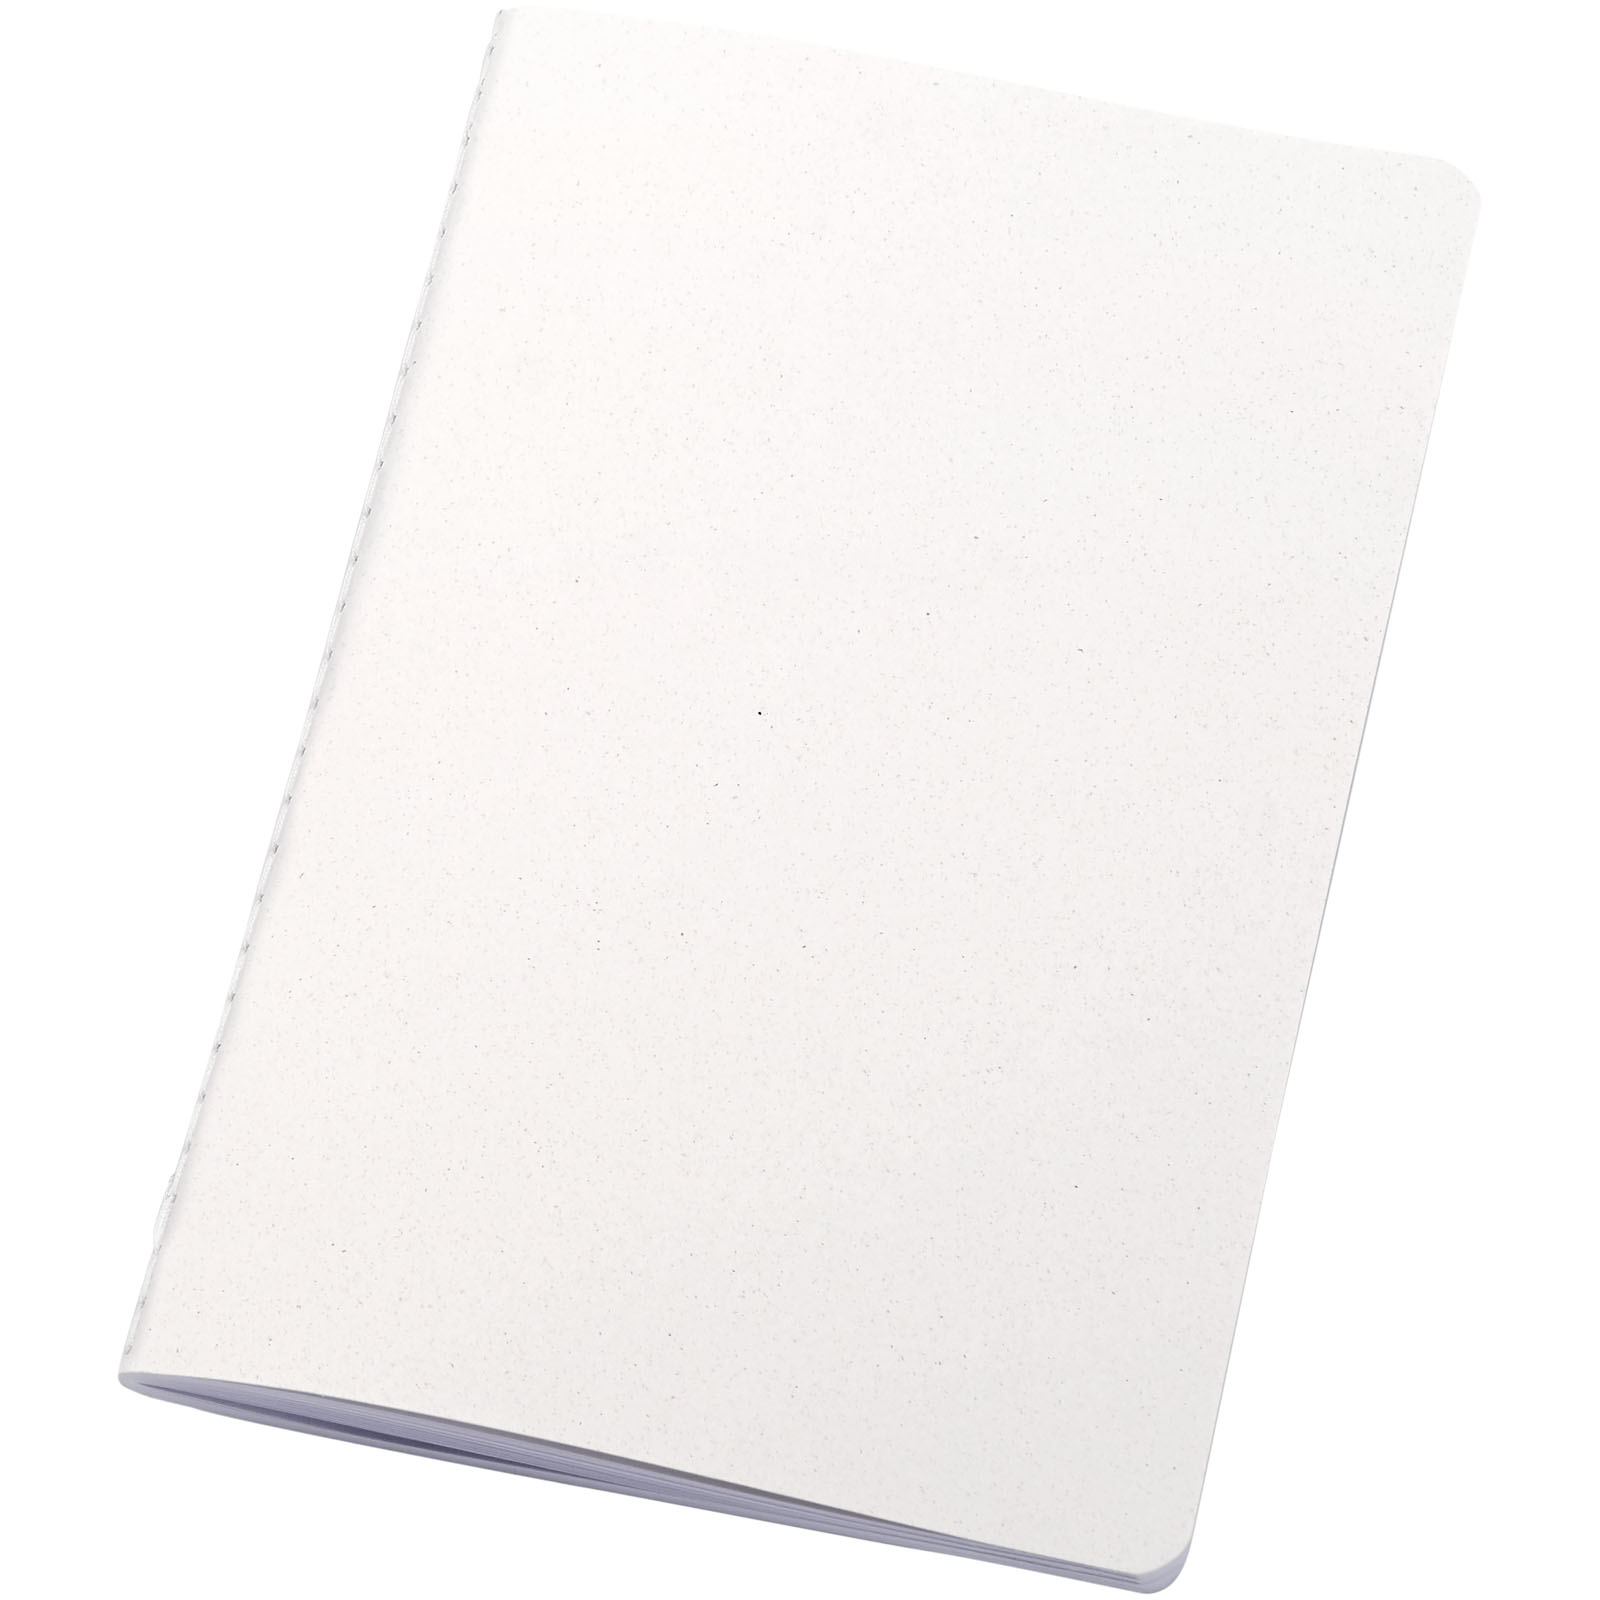 Advertising Notebooks - Fabia crush paper cover notebook - 0